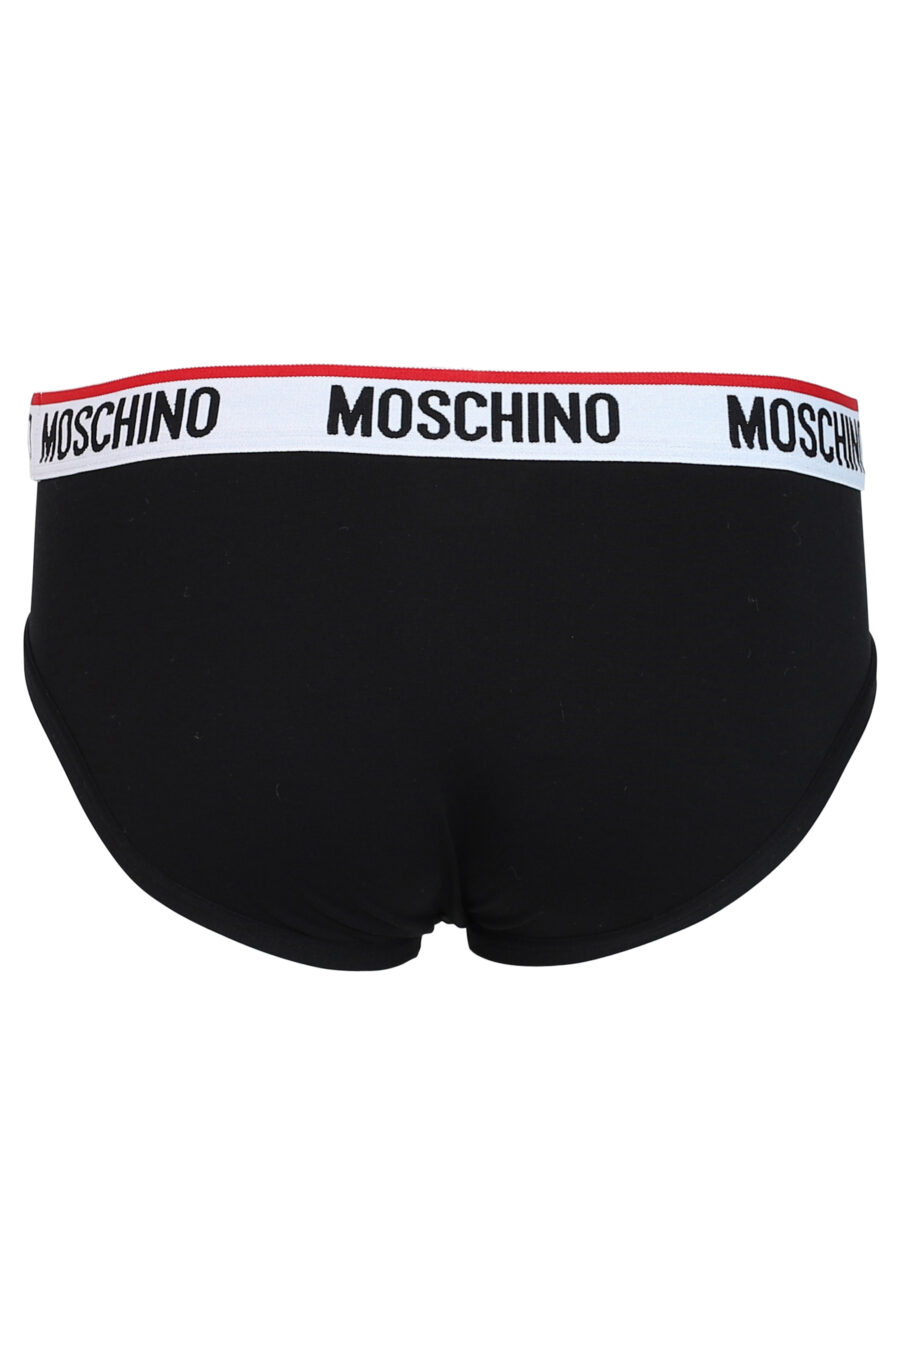 Pack of two boxer shorts with black and red logo on waistband - IMG 0346